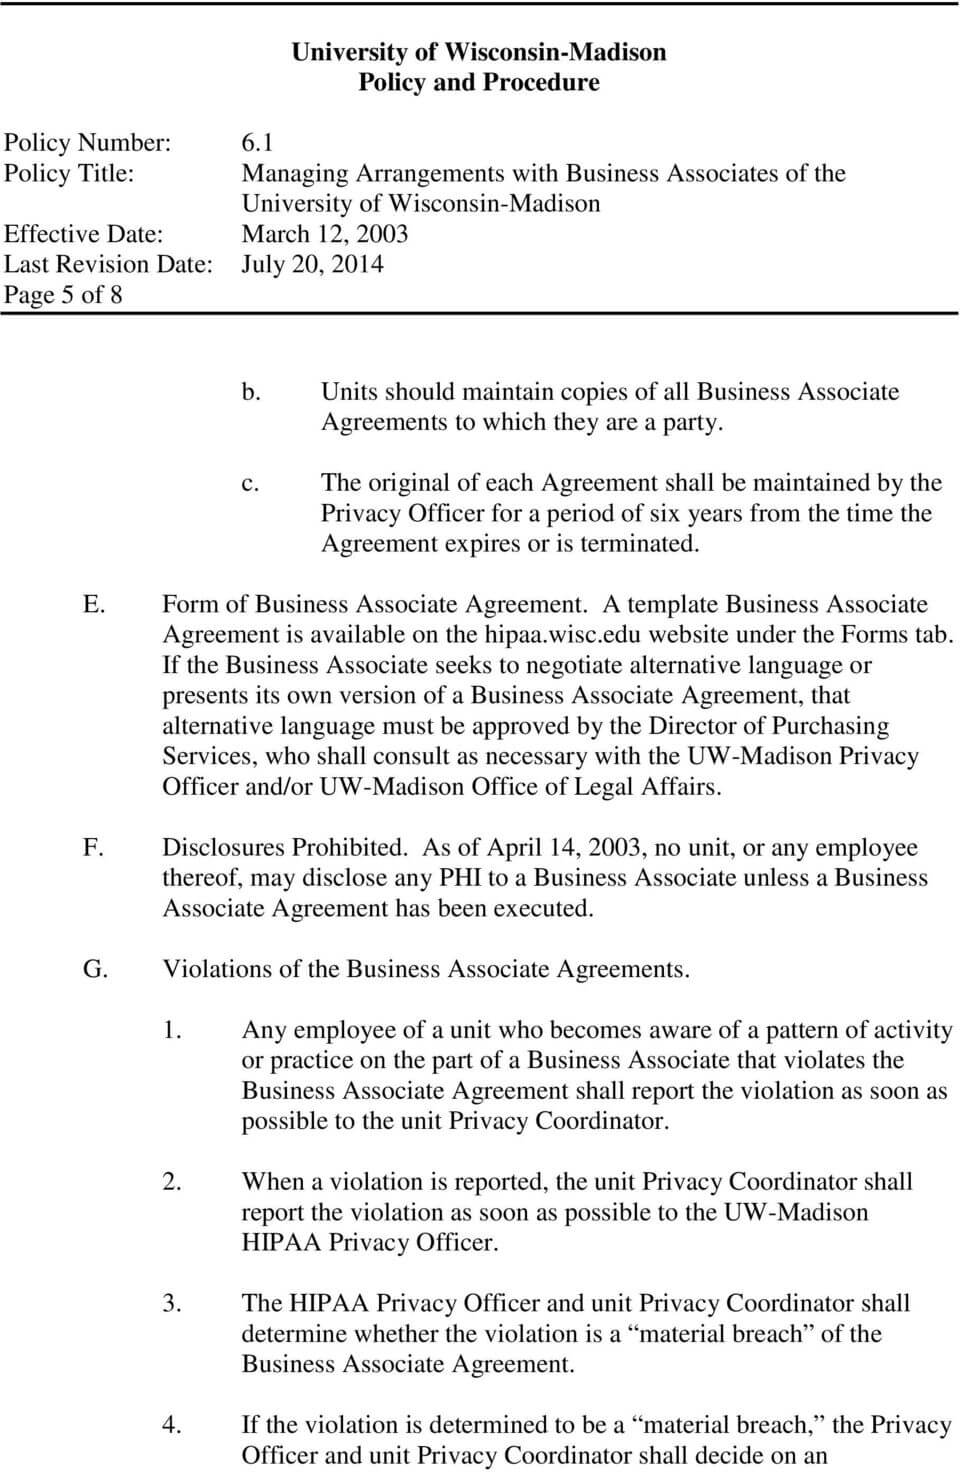 University Of Wisconsin Madison Policy And Procedure With Regard To Business Associate Agreement Hipaa Template